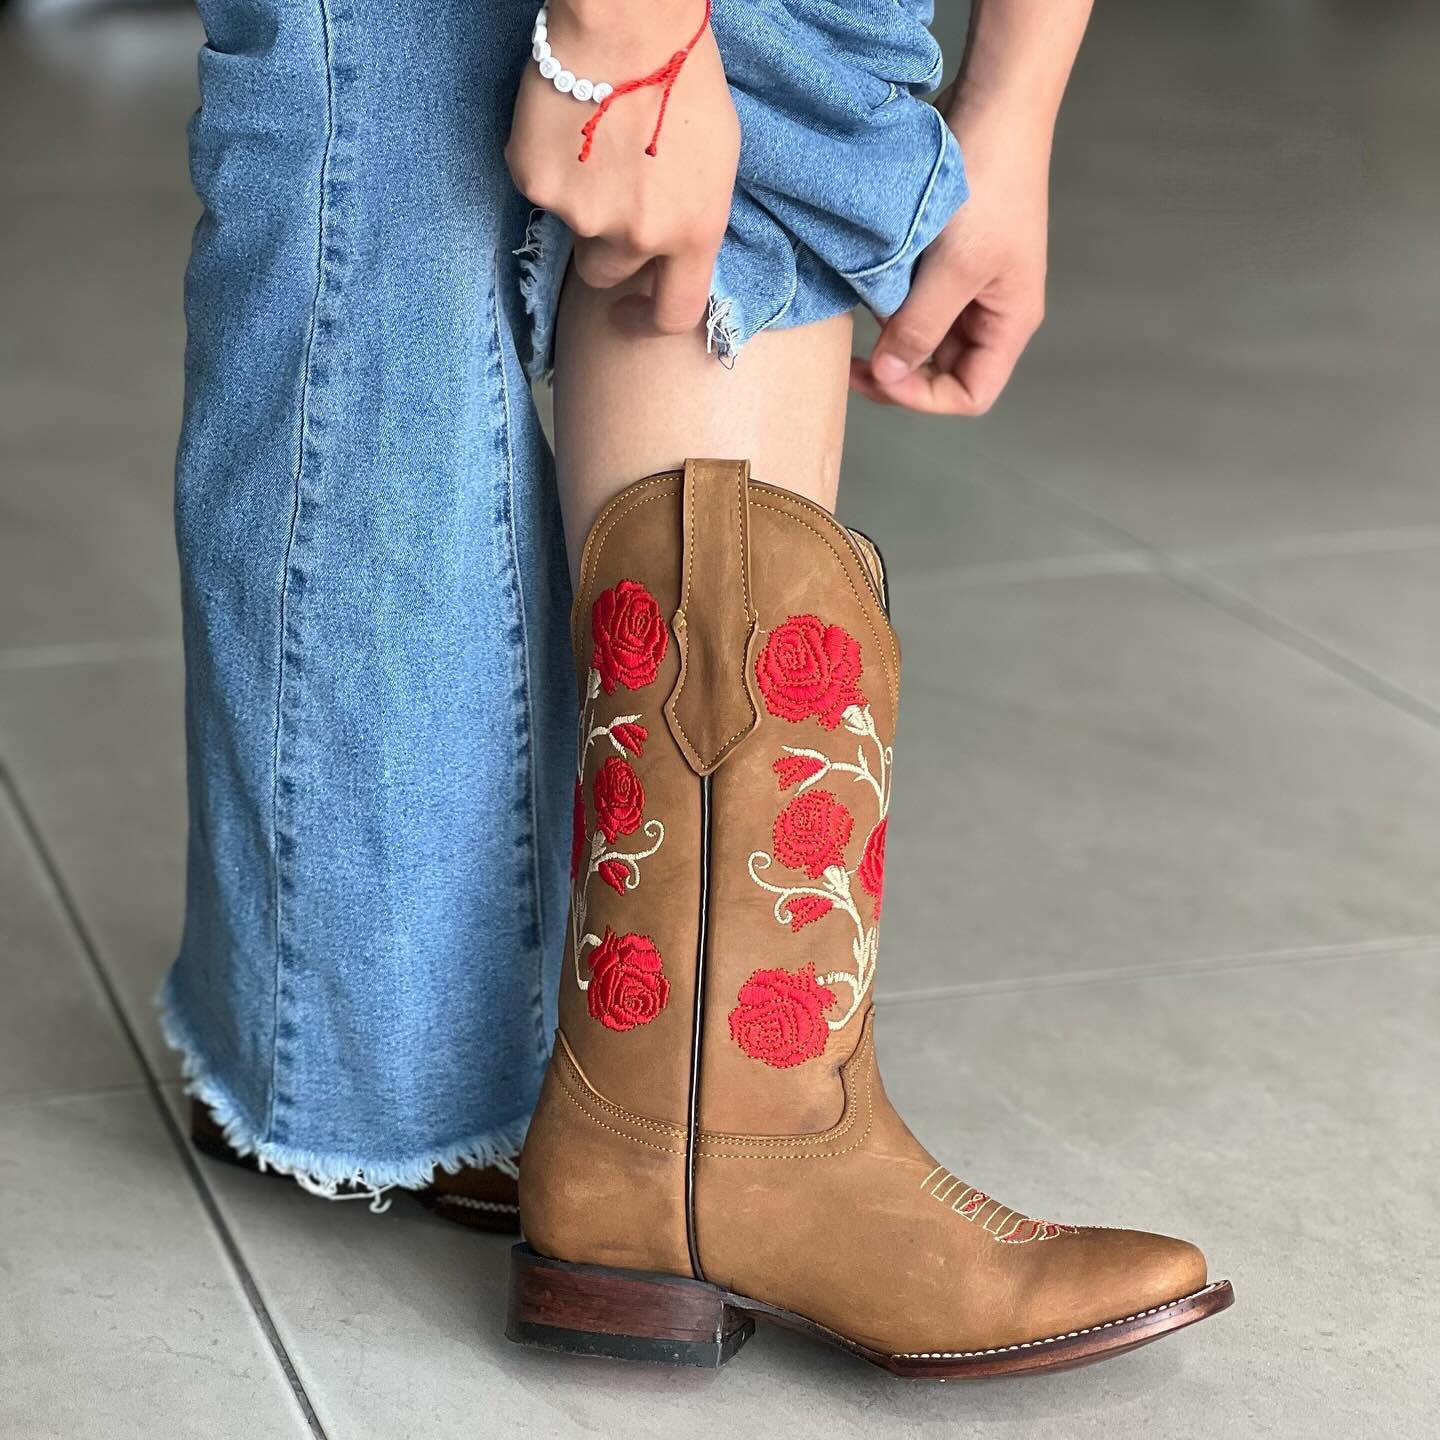 Women's Embroidered Rose Boots